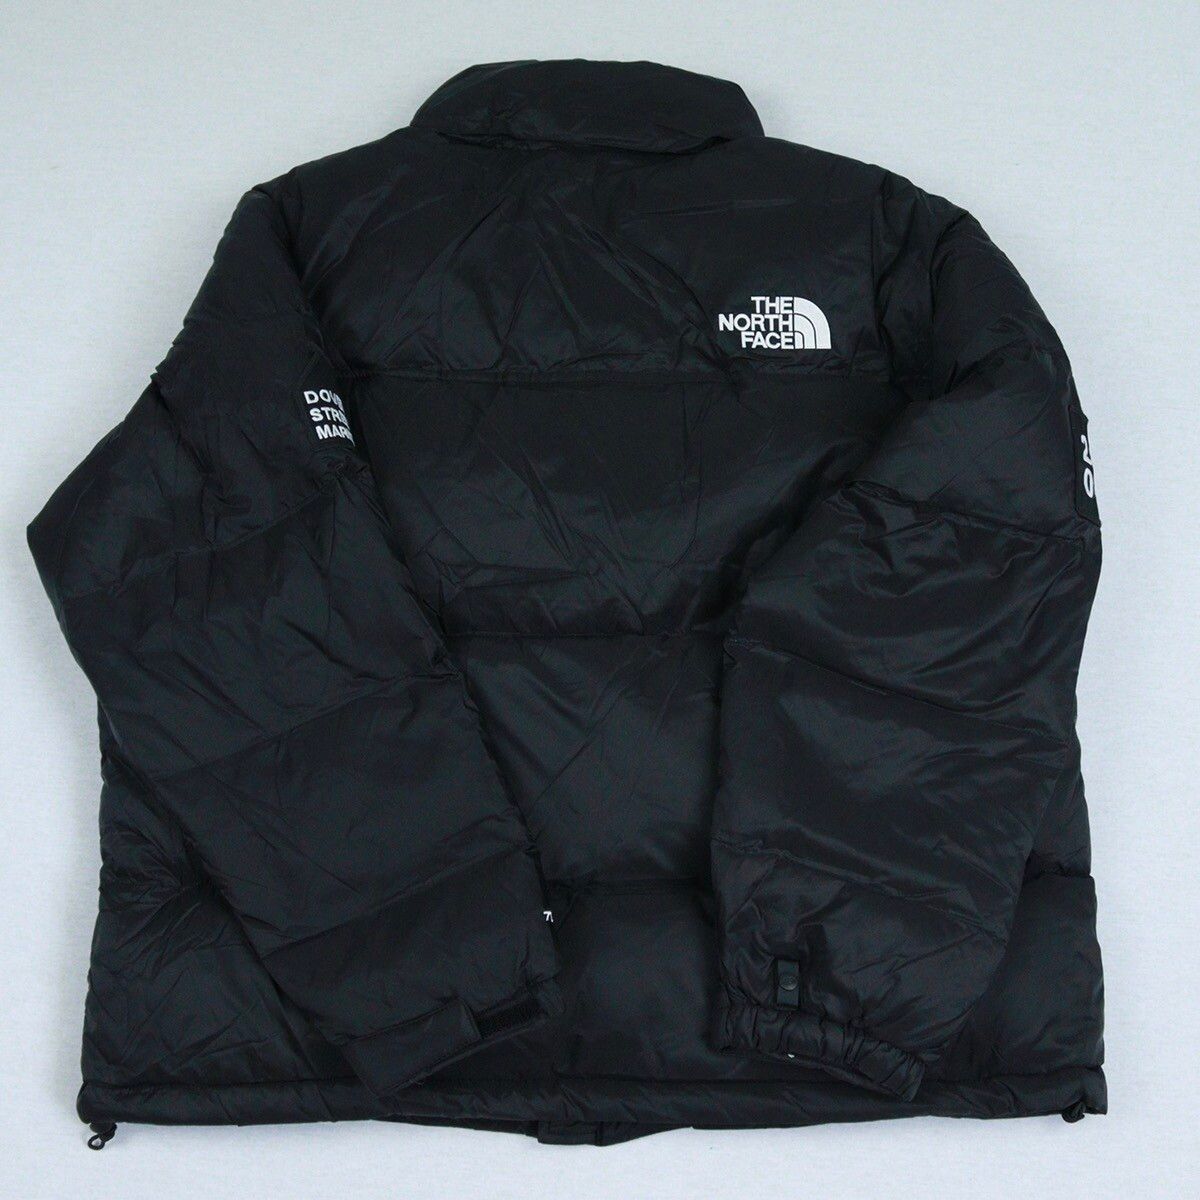 The North Face The north face DSM Dover street market nuptse 